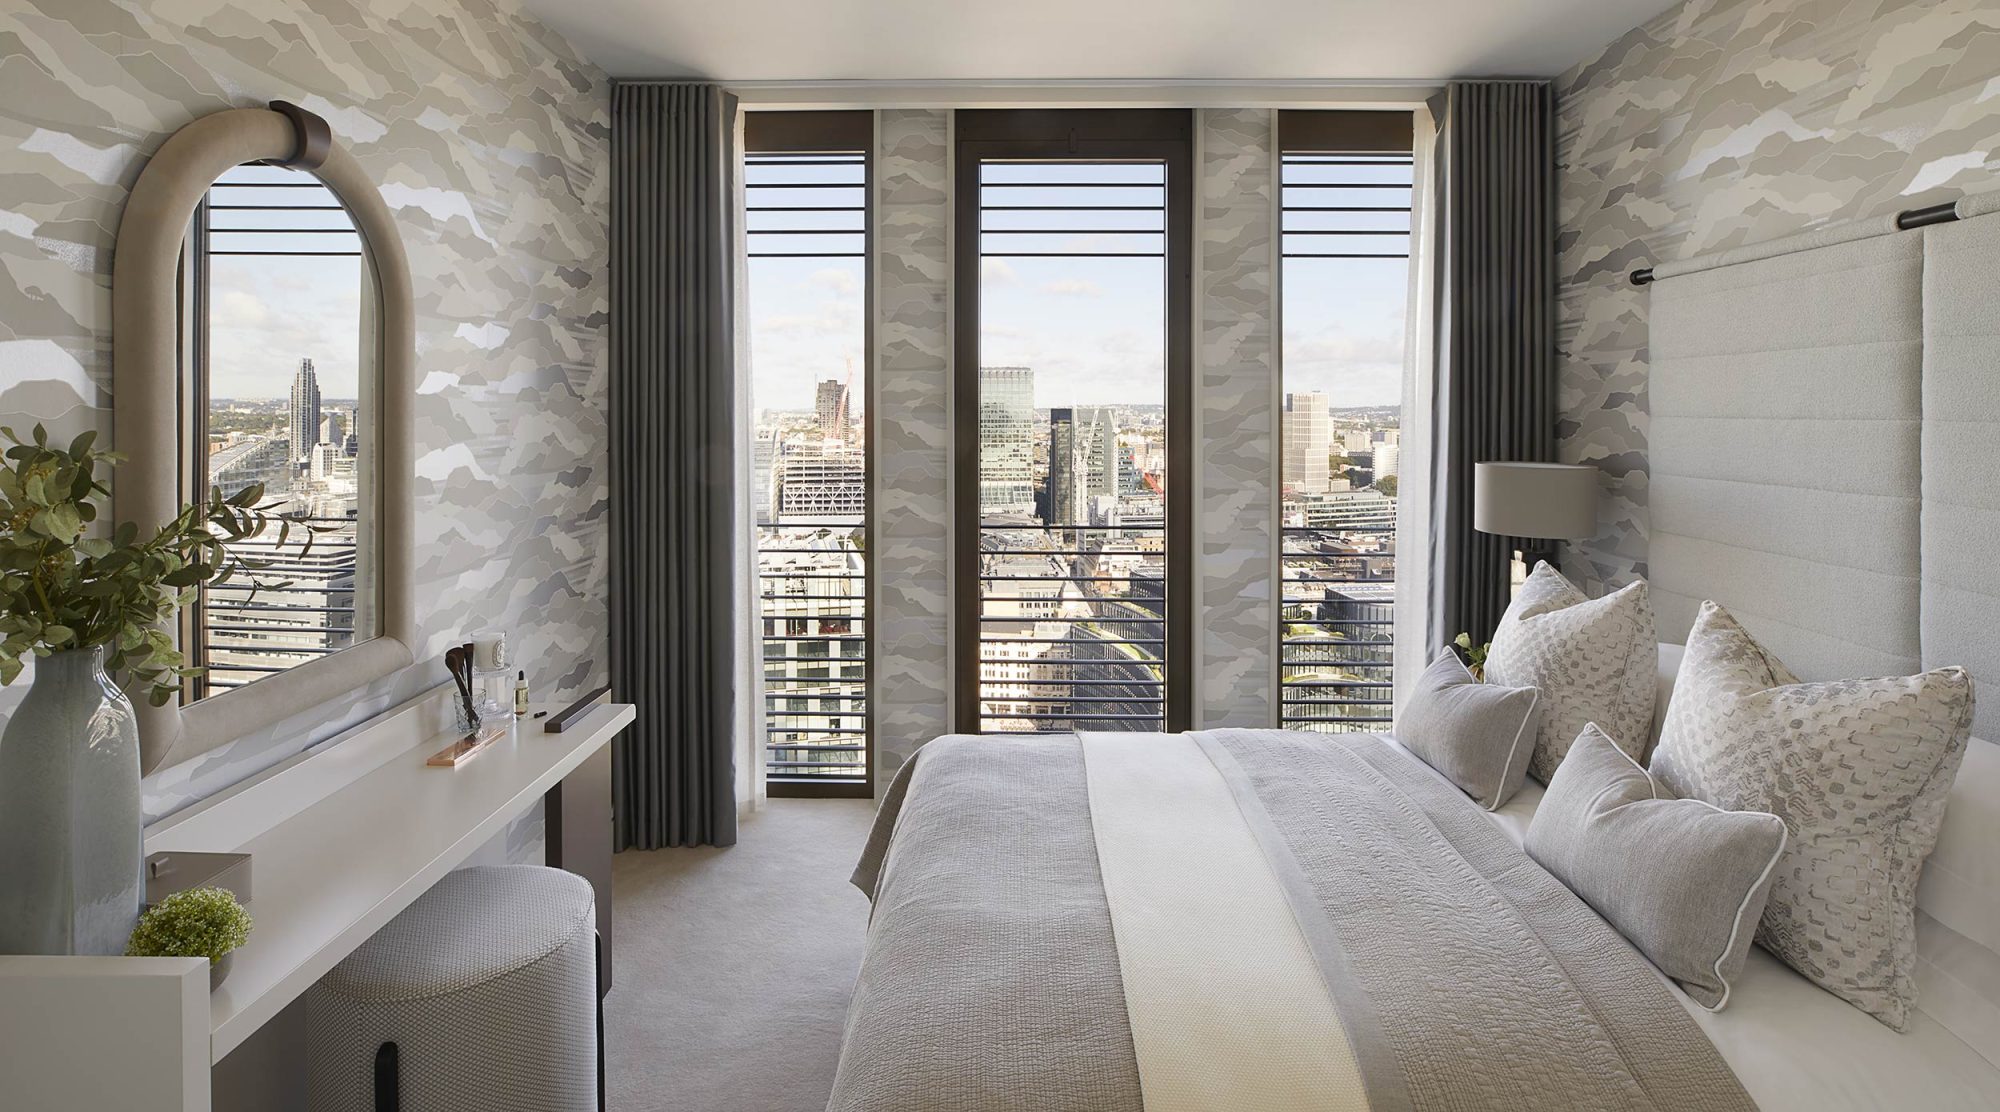 Discover the Sky Residences at One Bishopsgate Plaza in London’s Financial Heart